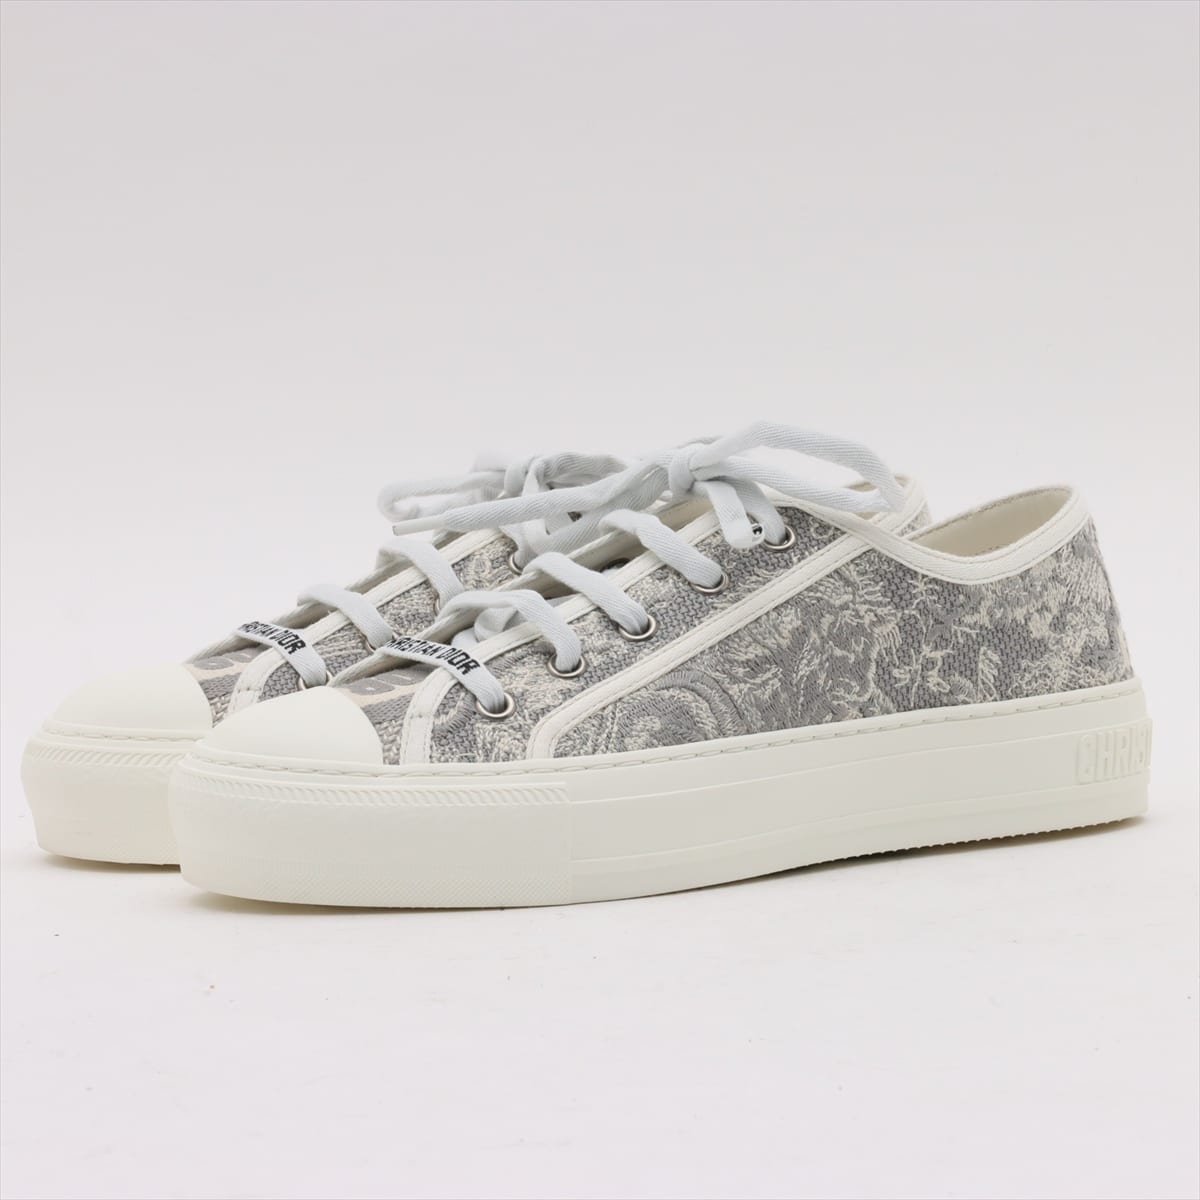 Christian Dior canvas Sneakers 36 1/2 Ladies' Grey Walkindior KCK211JE37 Is there a replacement string